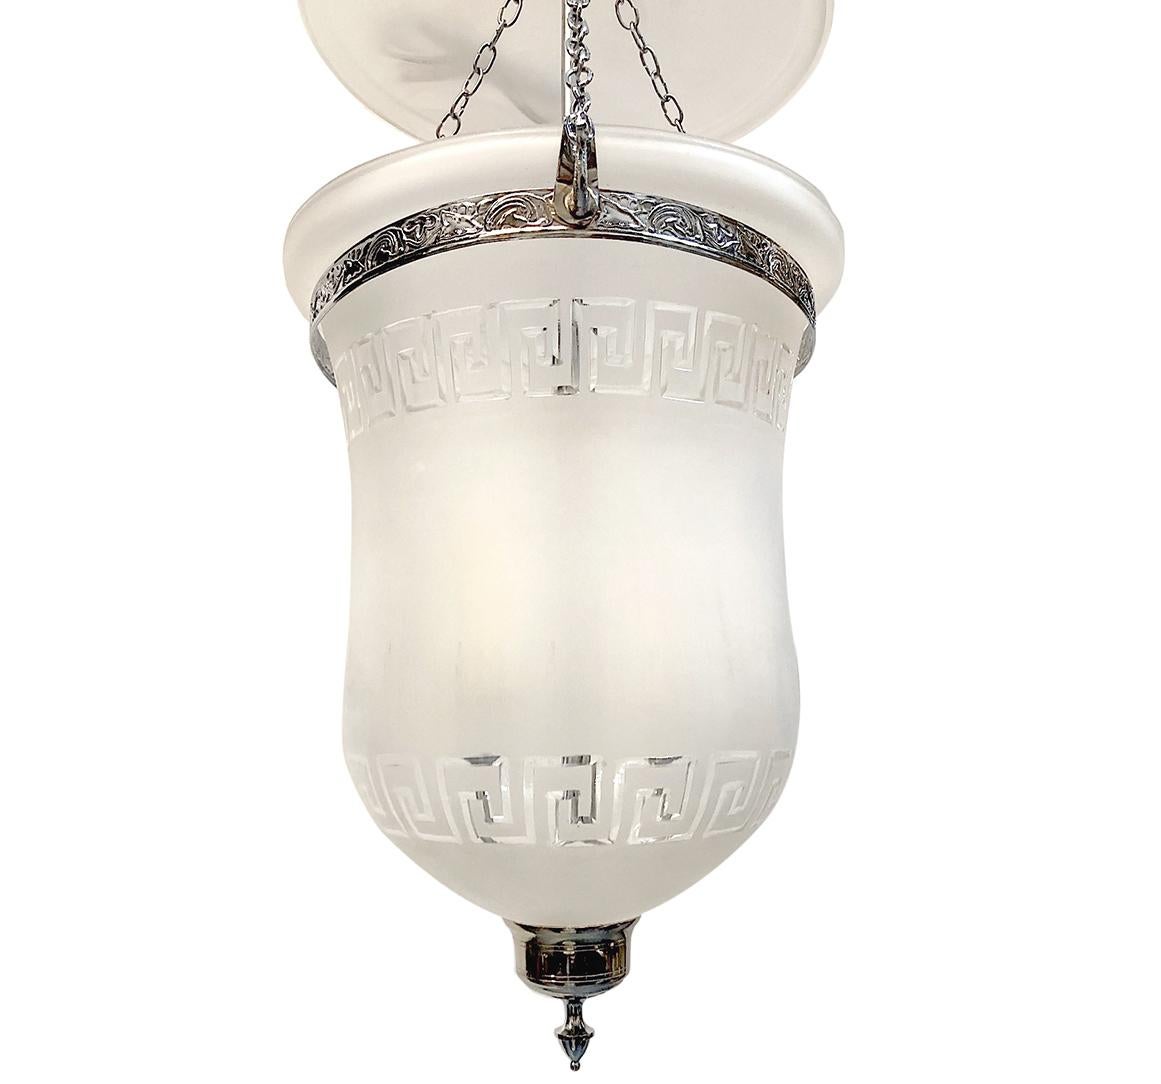 A pair of circa 1940s reverse-etched frosted glass lanterns with nickel-plated body and three interior lights. Sold individually.

Measurements:
Diameter 13